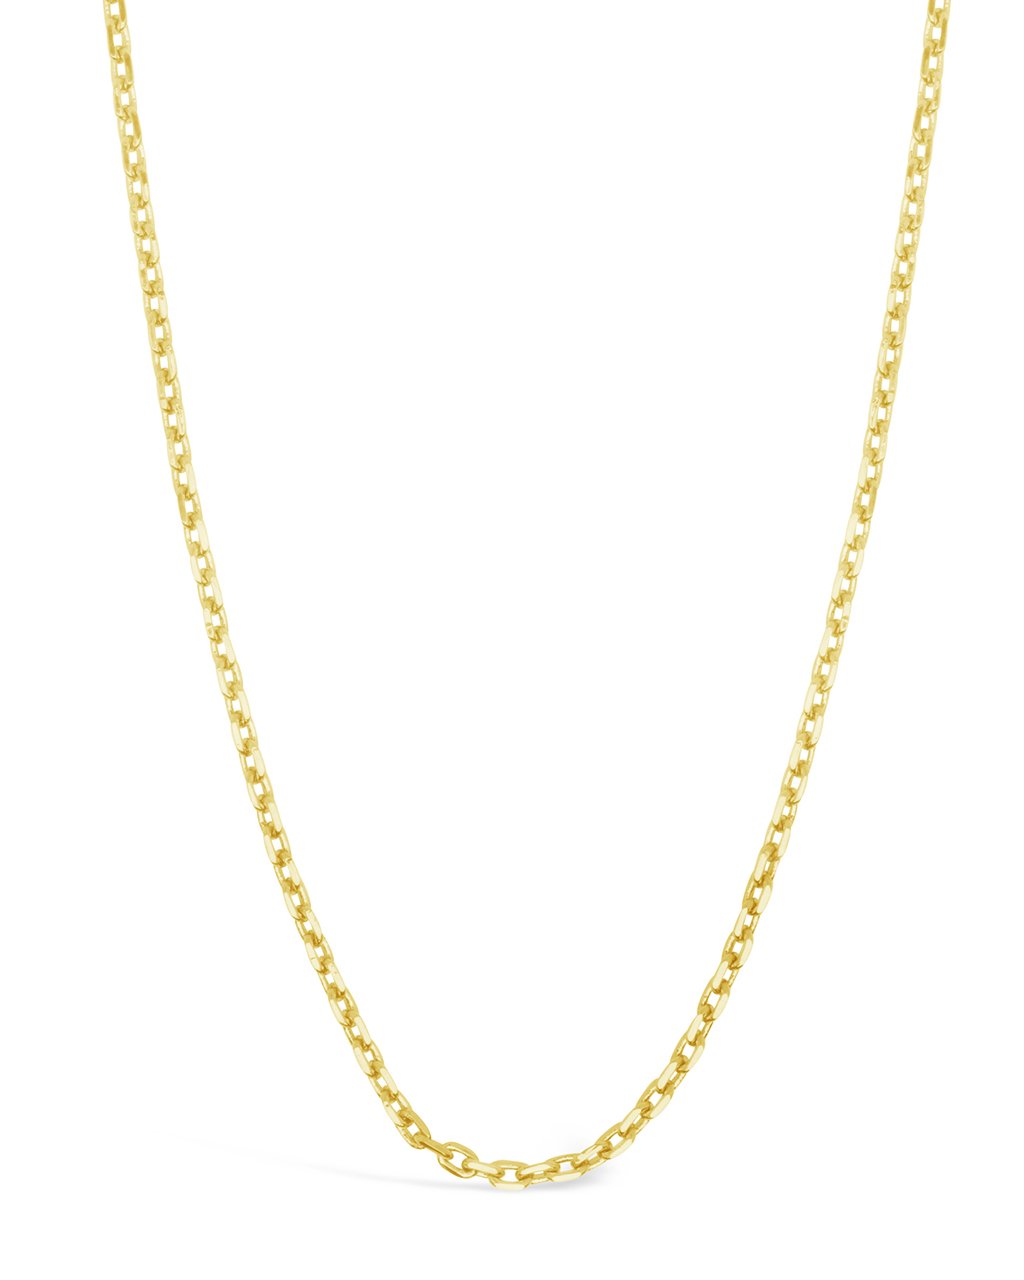 Dainty Link Face Mask Chain Face Mask Chain Sterling Forever Gold 